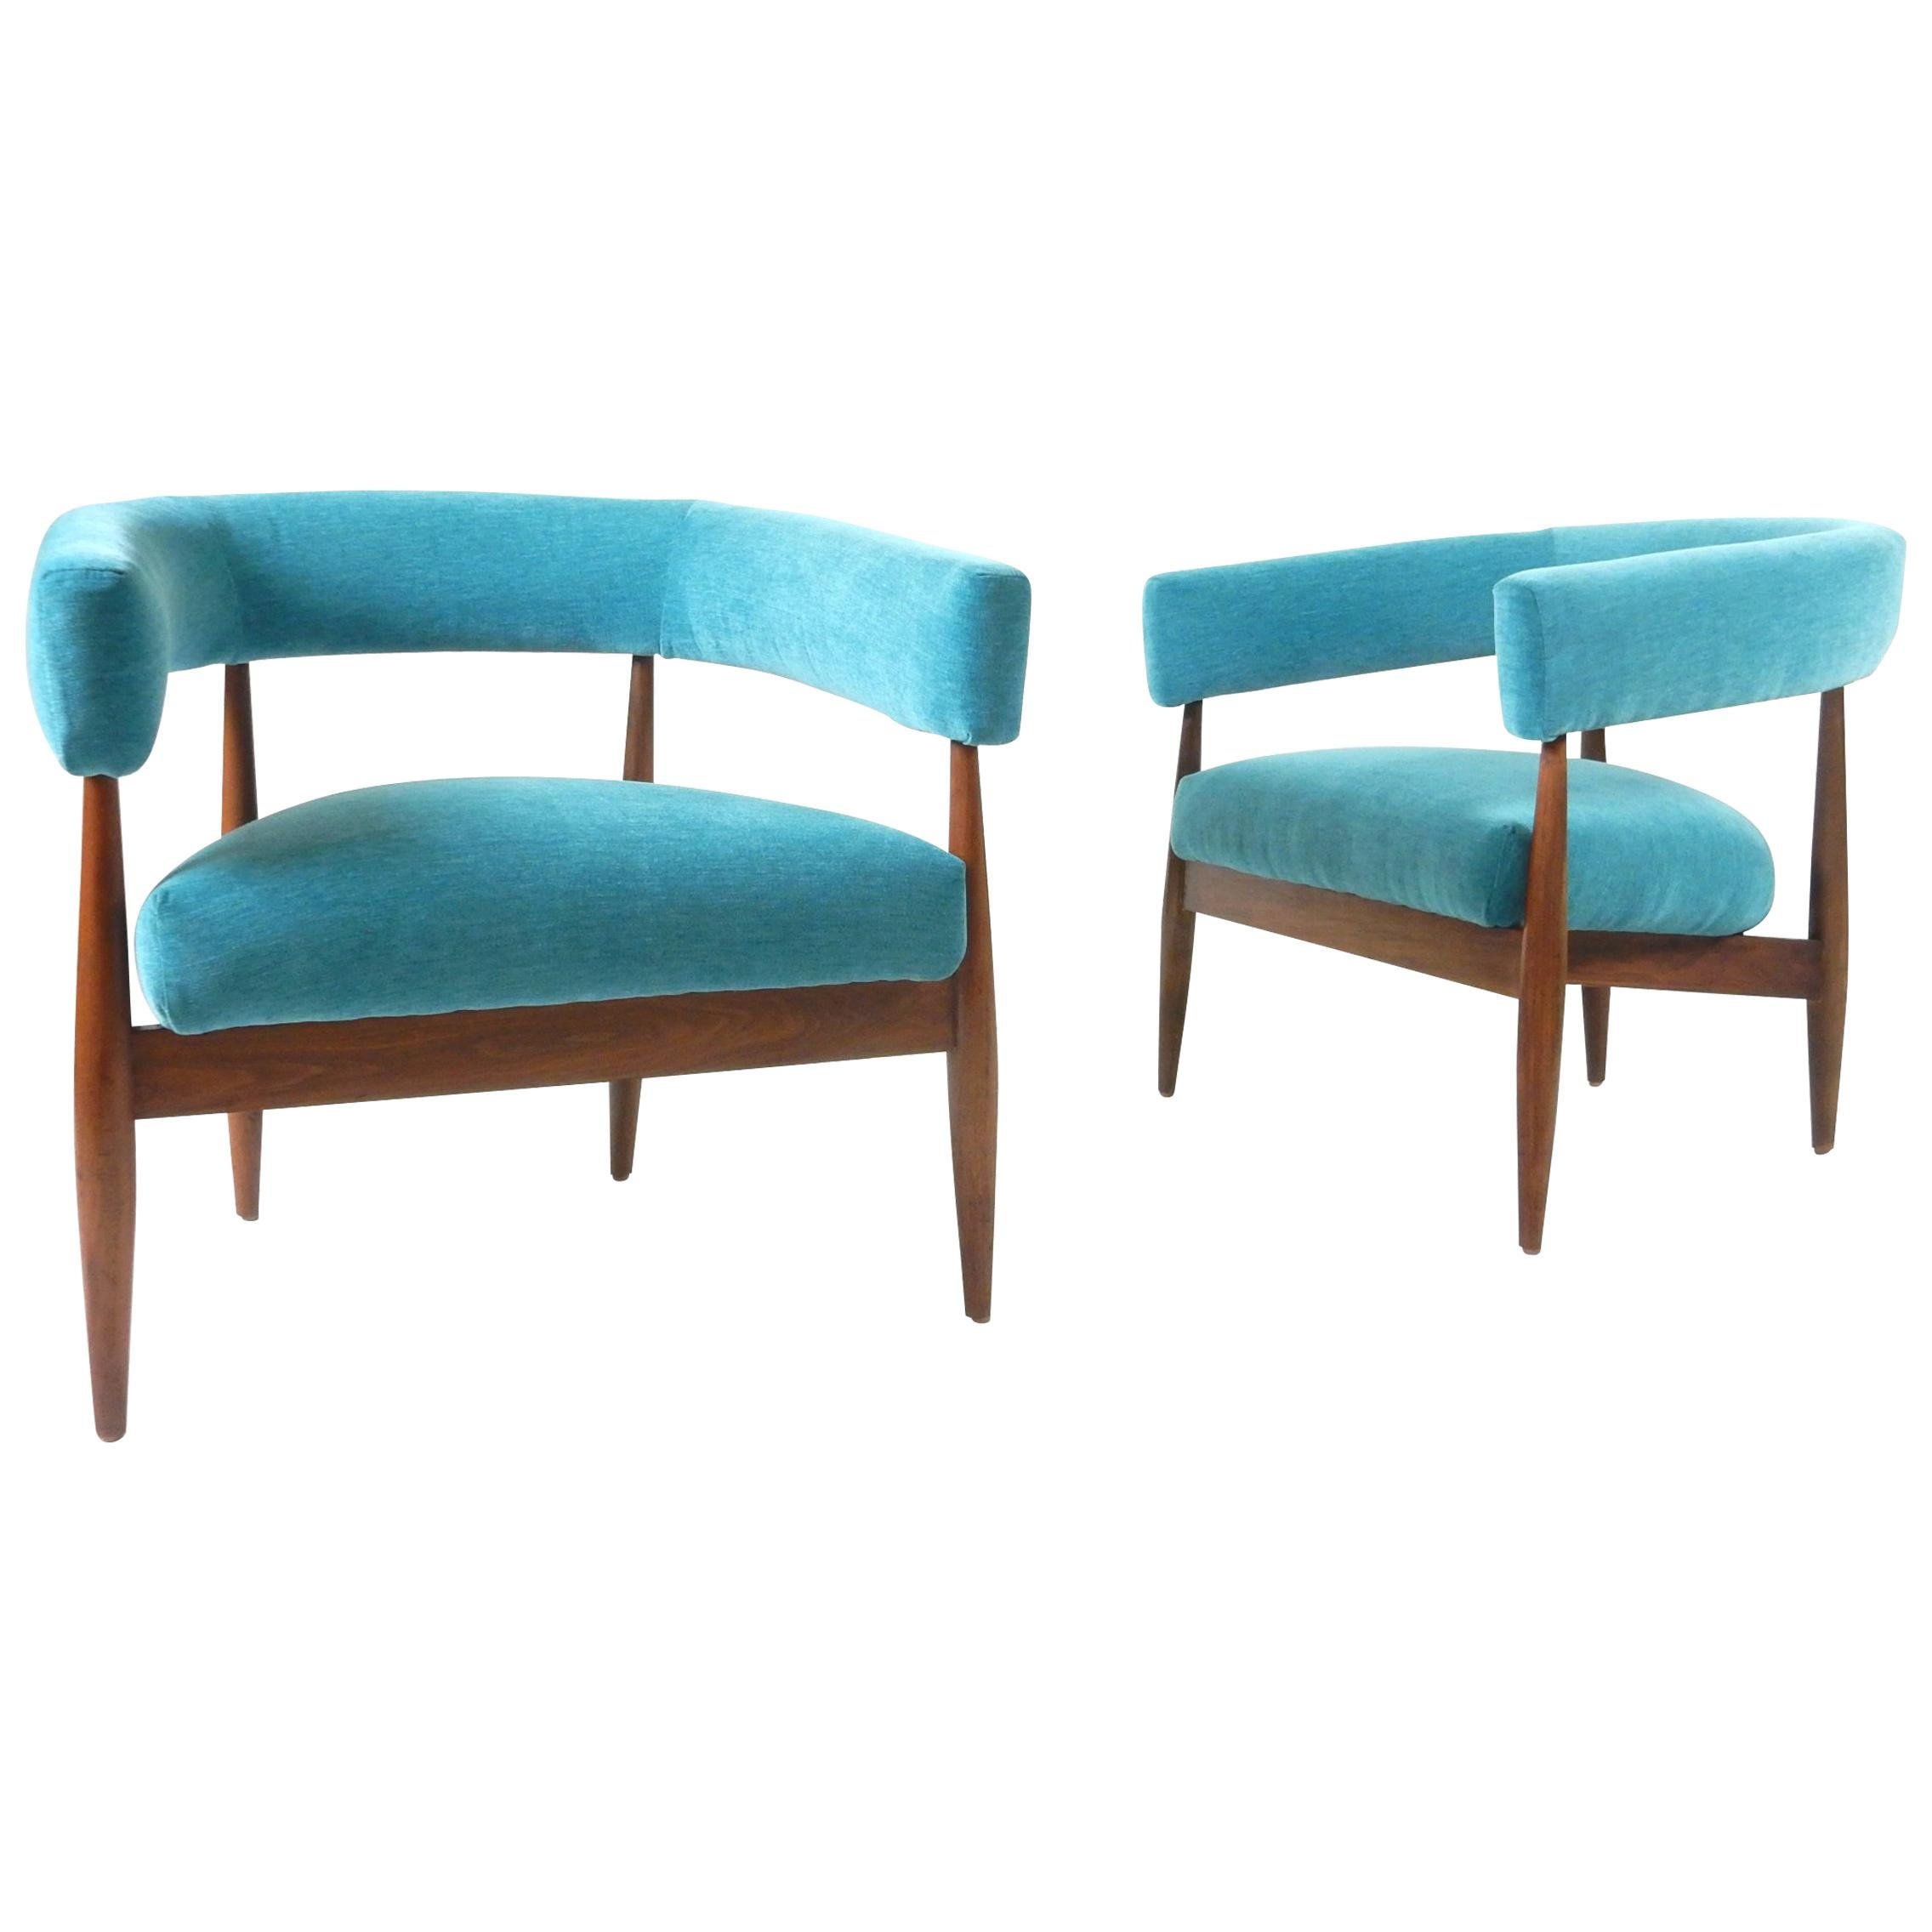 1950s Club Chairs by Kodawood